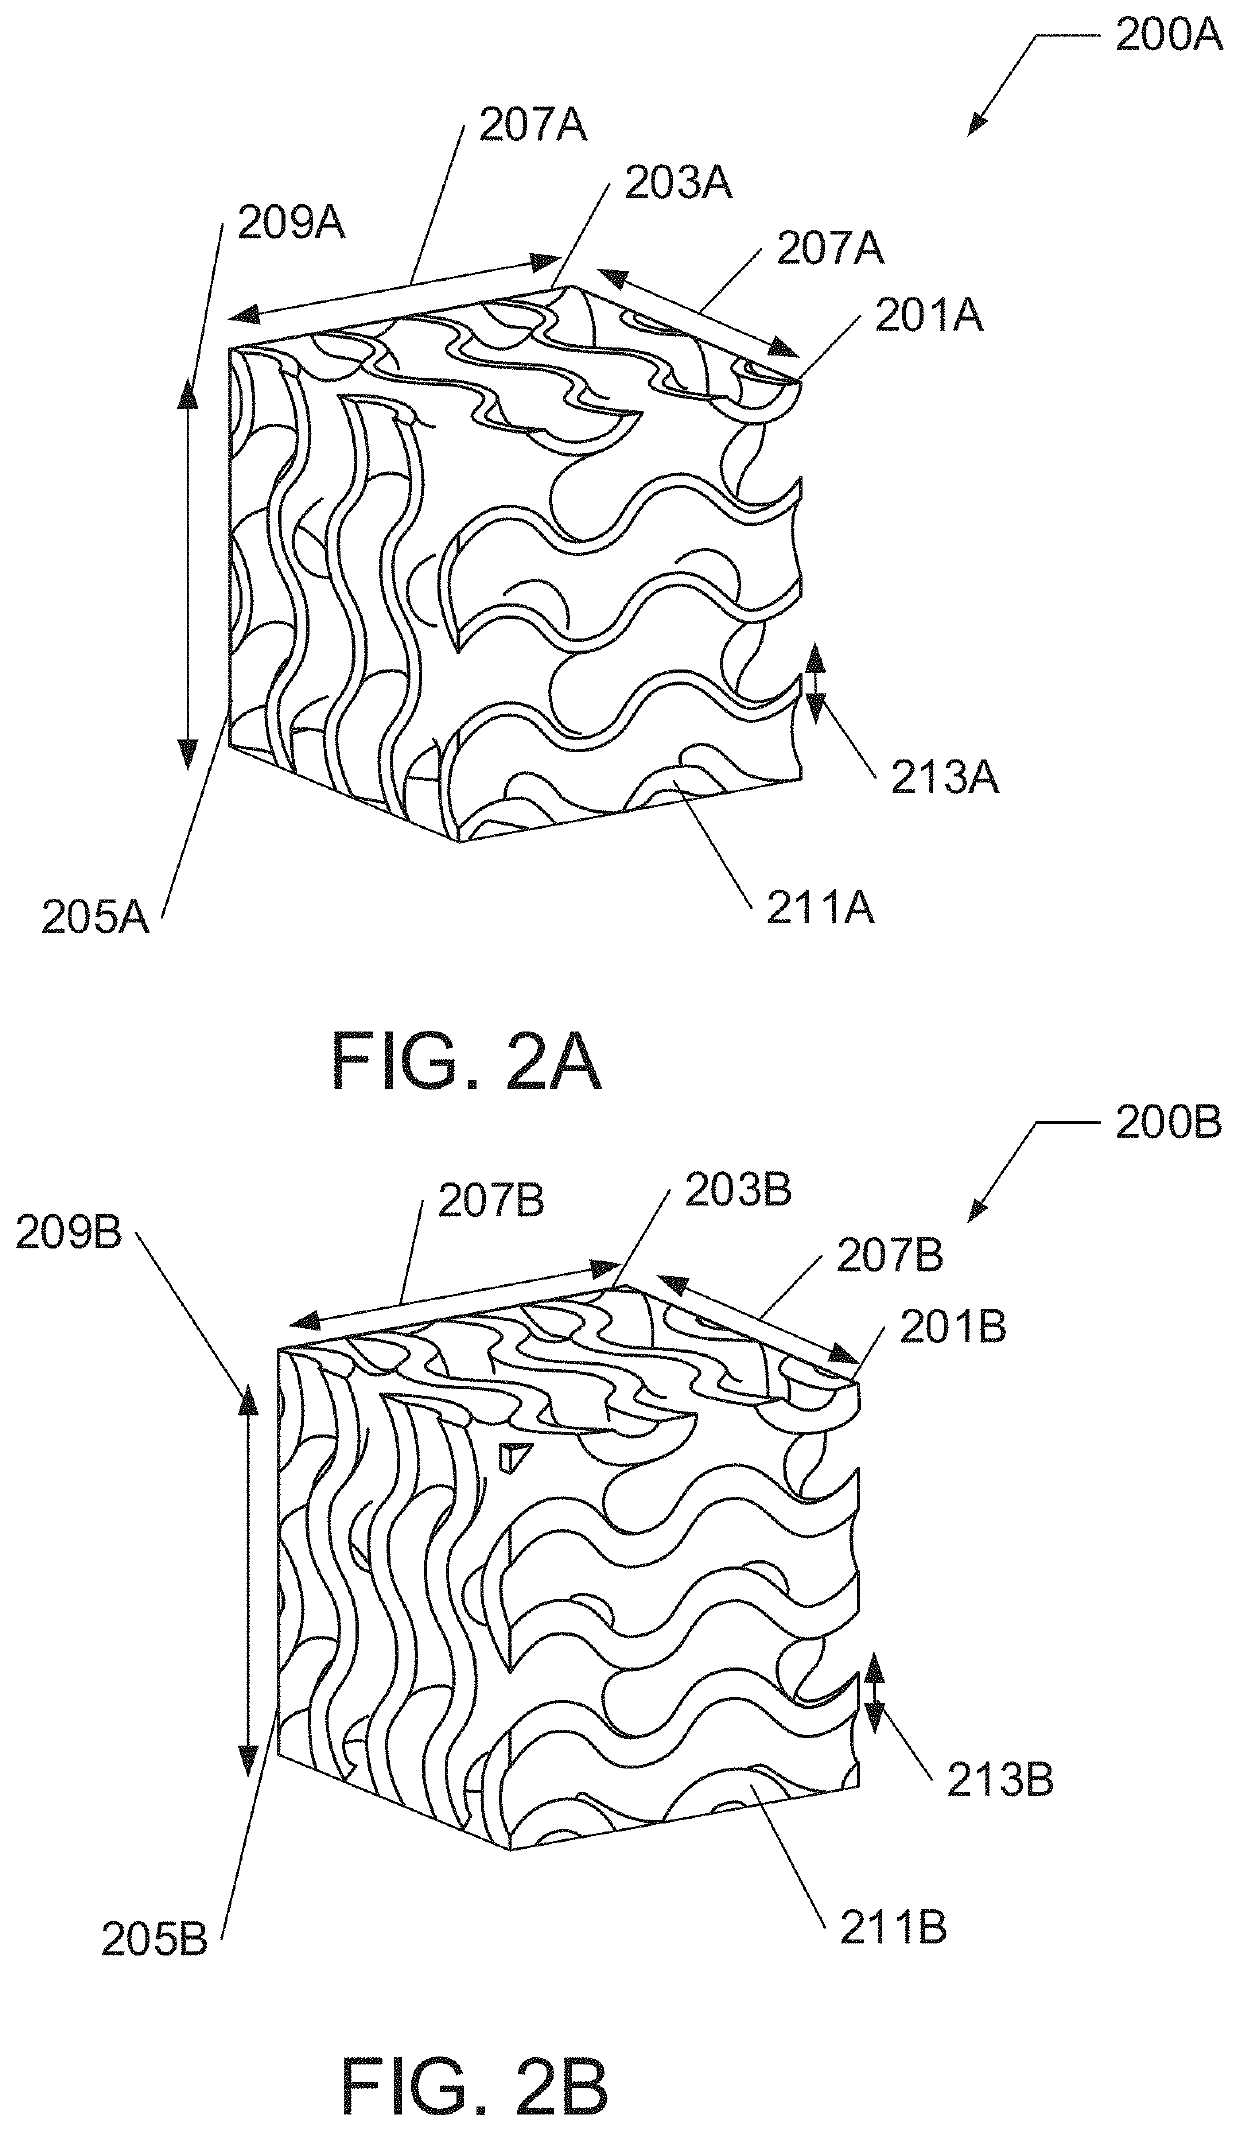 Sheet based triply periodic minimal surface implants for promoting osseointegration and methods for producing same